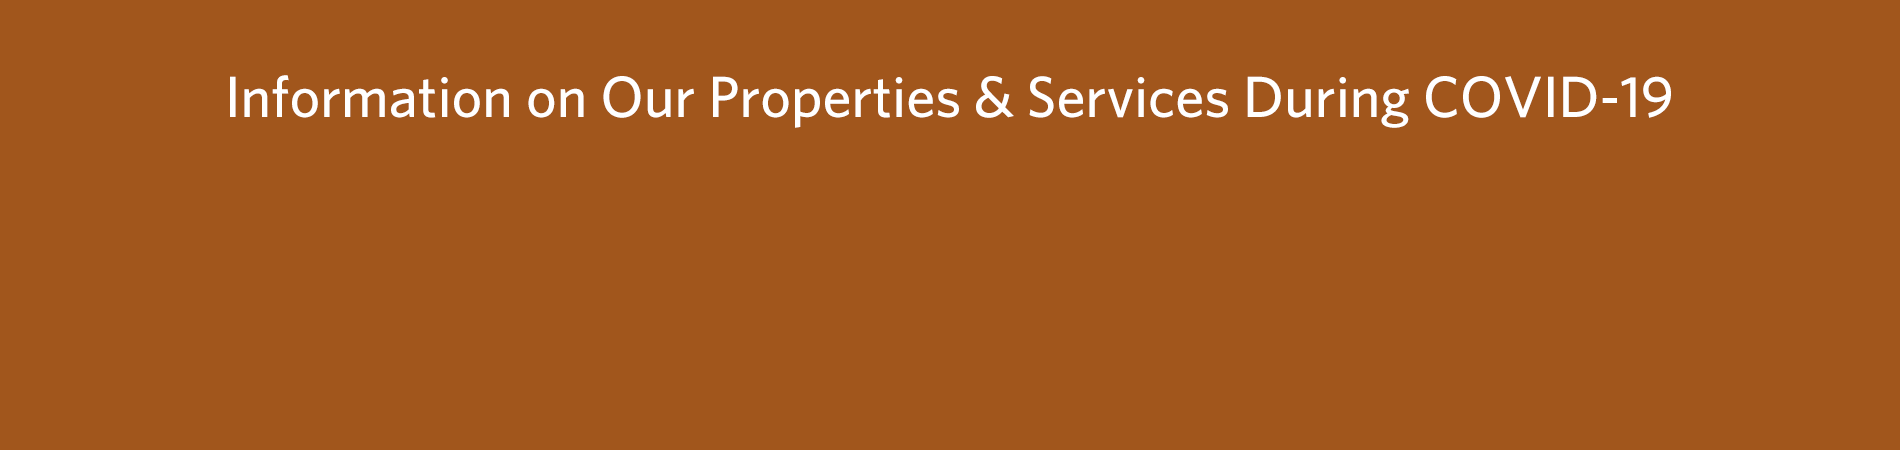 Information on our properties and services during COVID-19